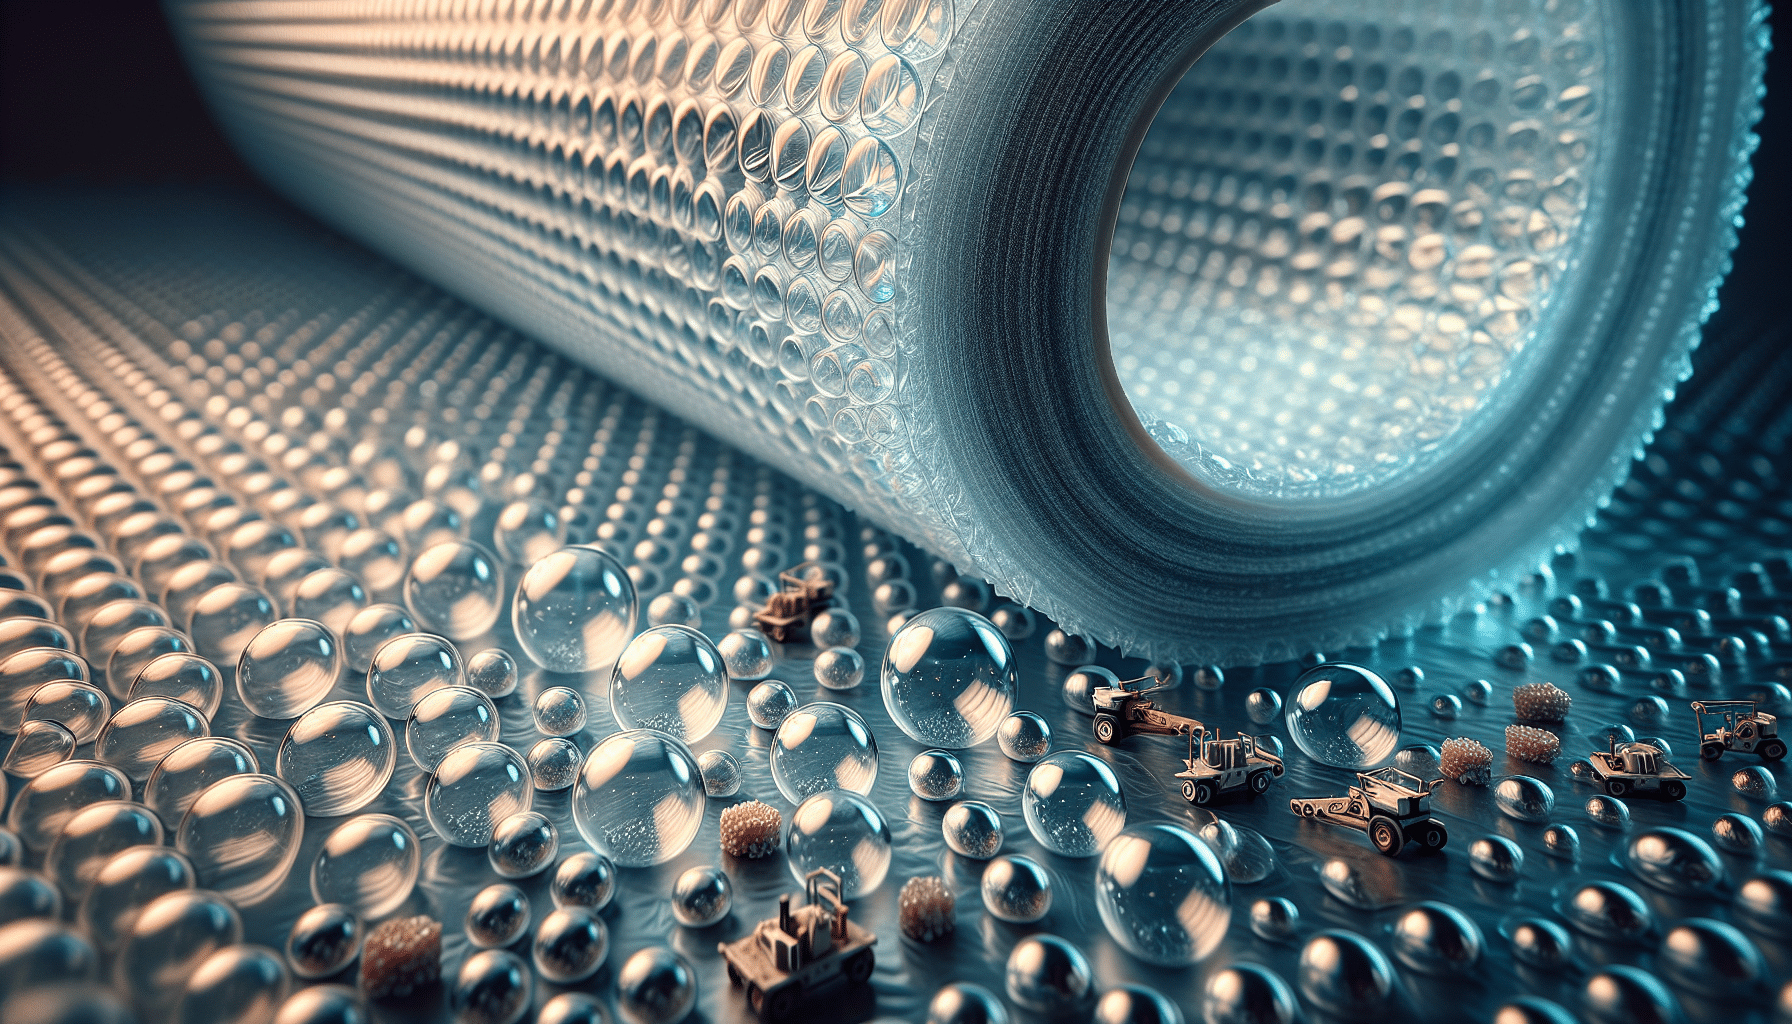 Bubble wrap production with close-up on air bubbles